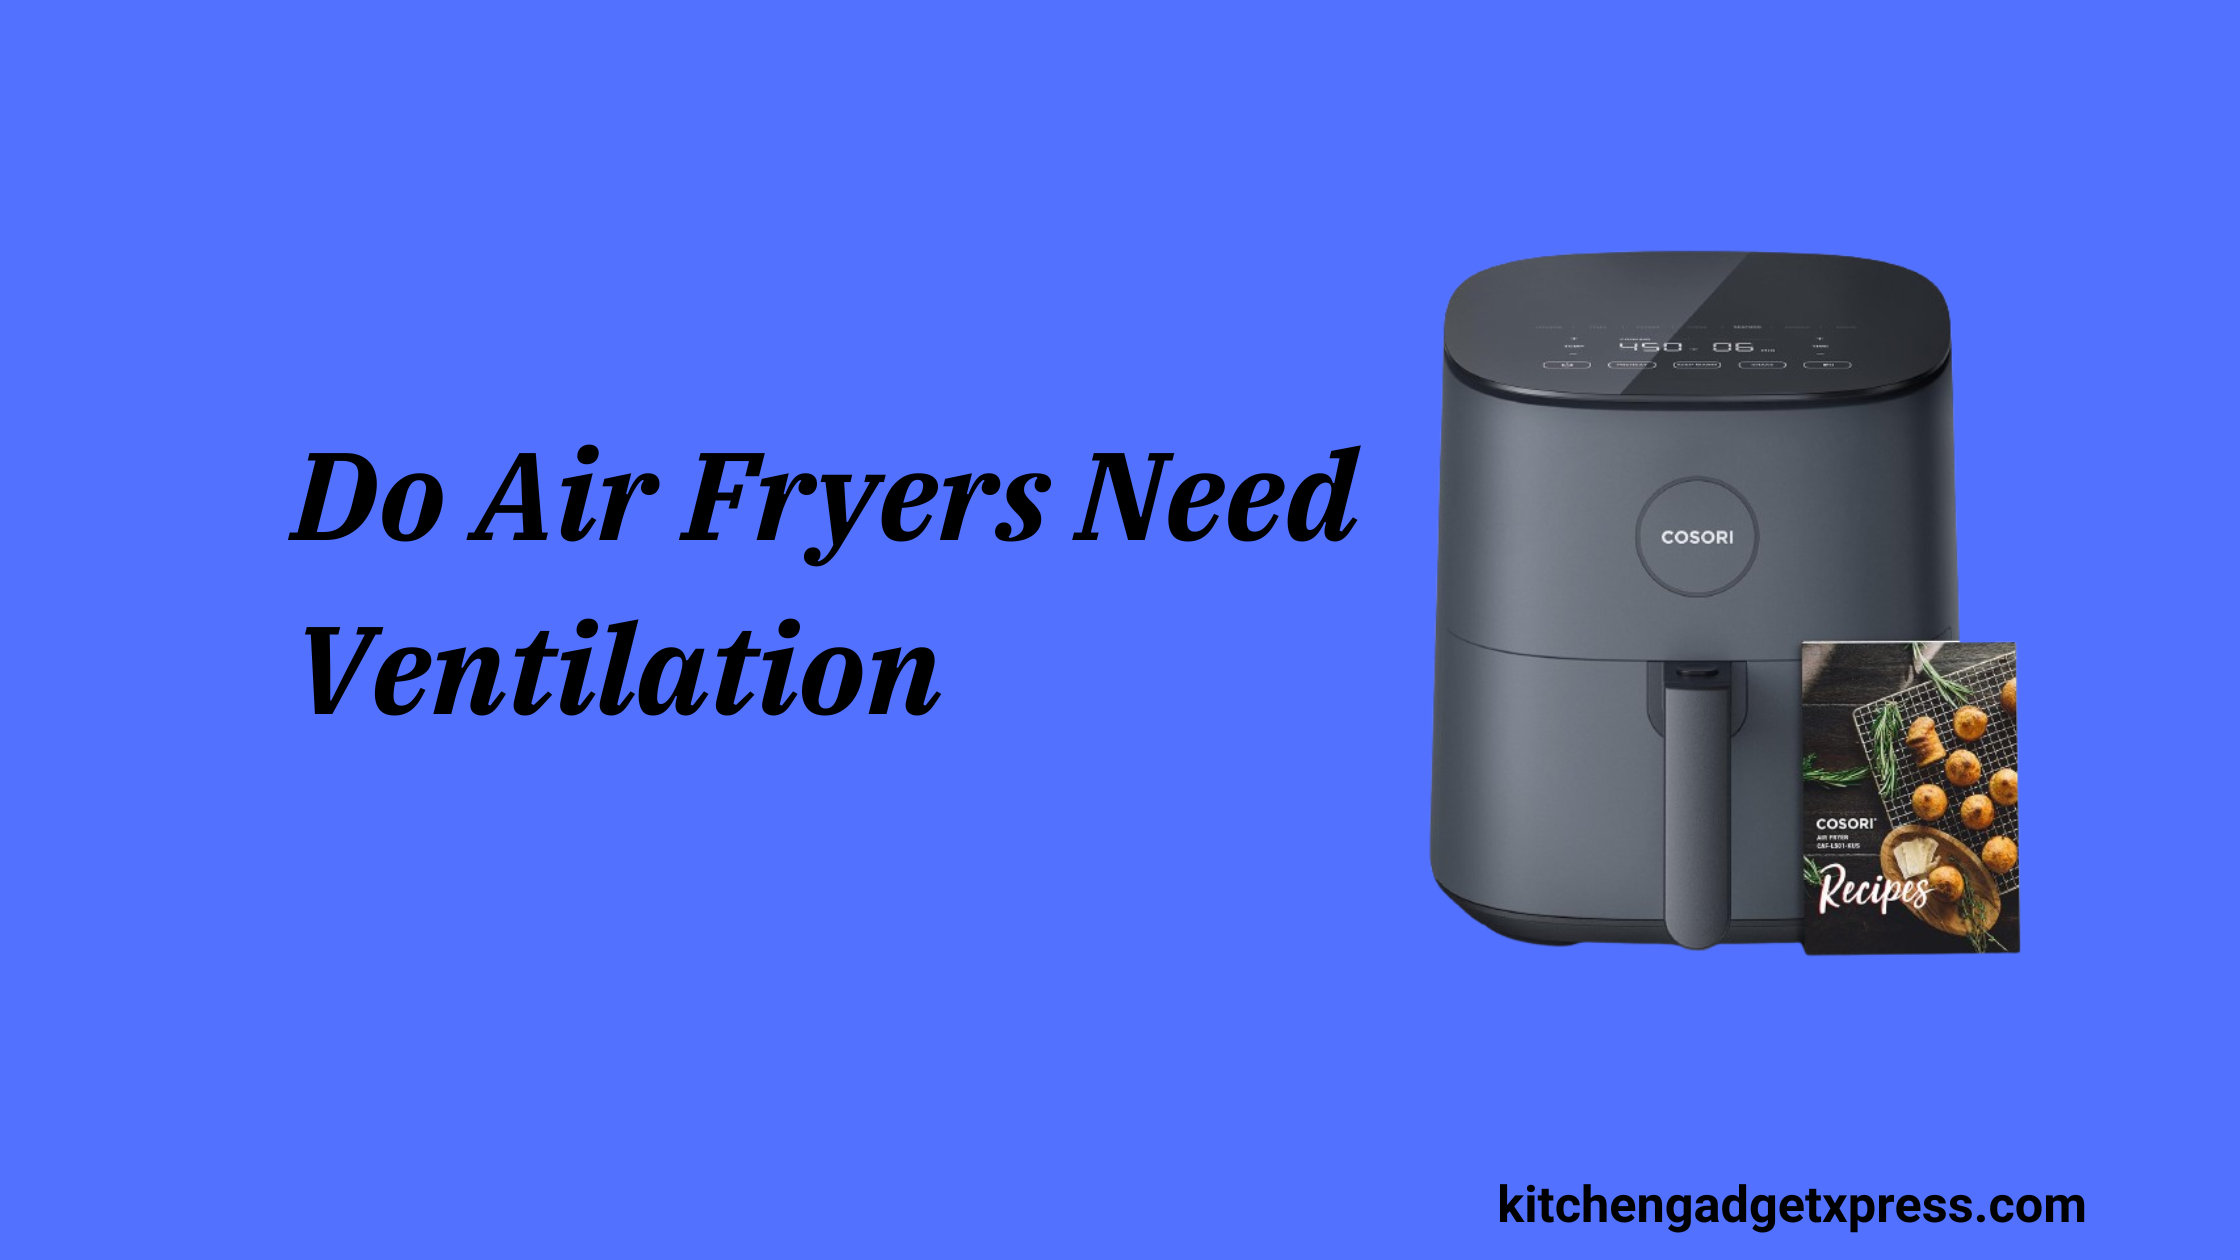 Do Air Fryers Need Ventilation